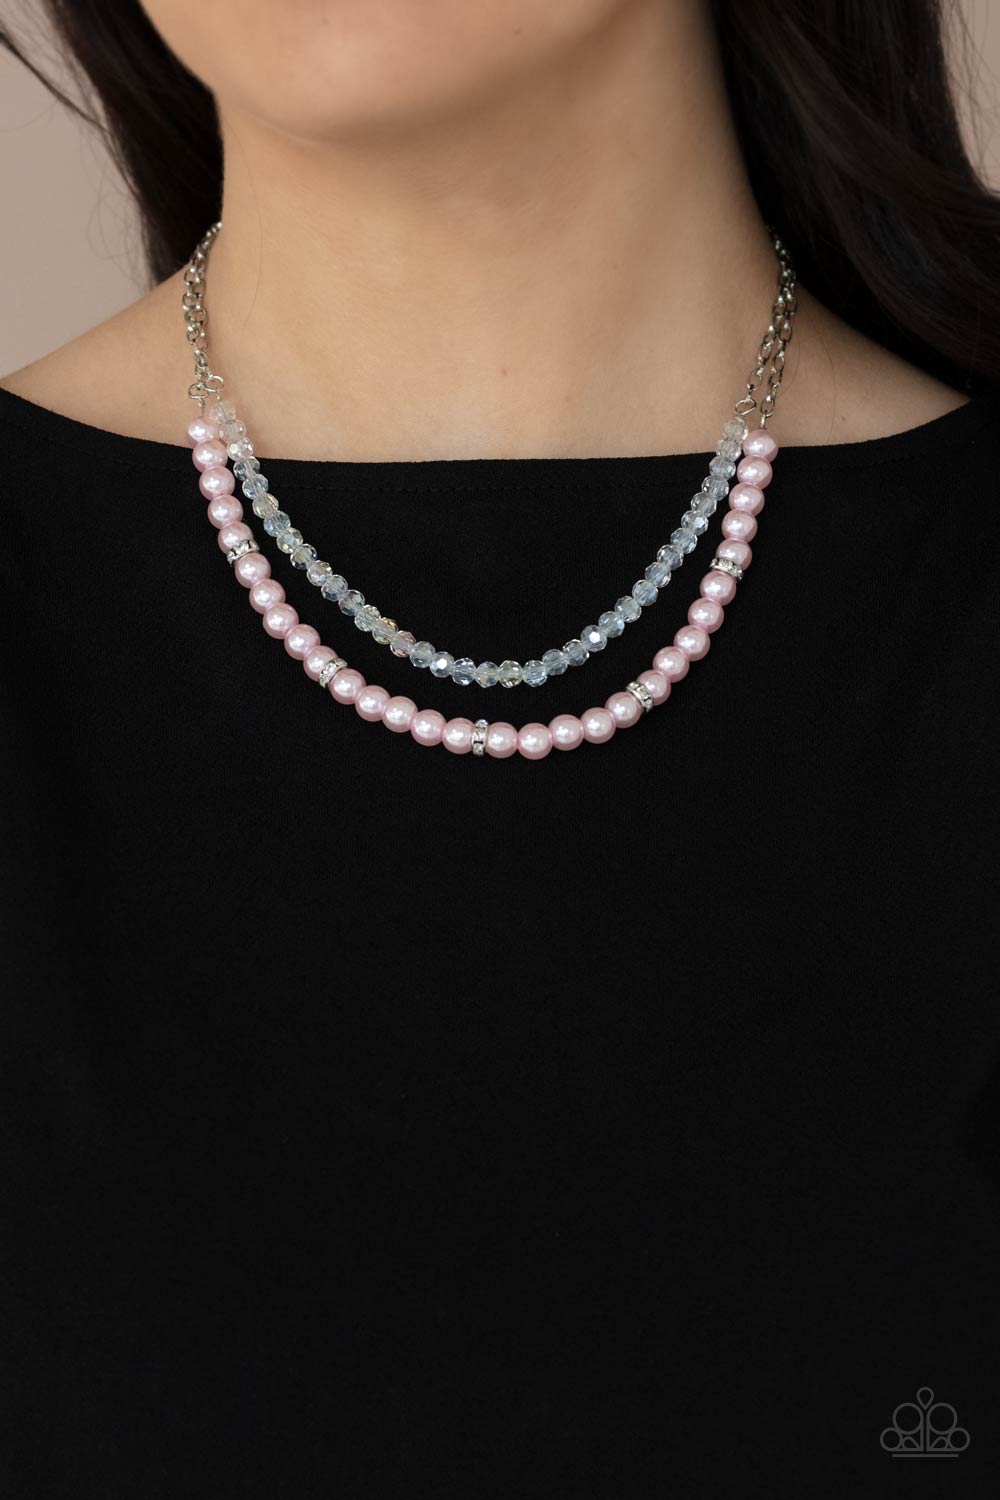 Parisian Princess Pink Necklace - Paparazzi Accessories  A strand of glassy white crystal-like beads and pearly pink beads and white rhinestone encrusted silver rings layer below the collar, creating a timeless display. Features an adjustable clasp closure.  All Paparazzi Accessories are lead free and nickel free!  Sold as one individual necklace. Includes one pair of matching earrings.